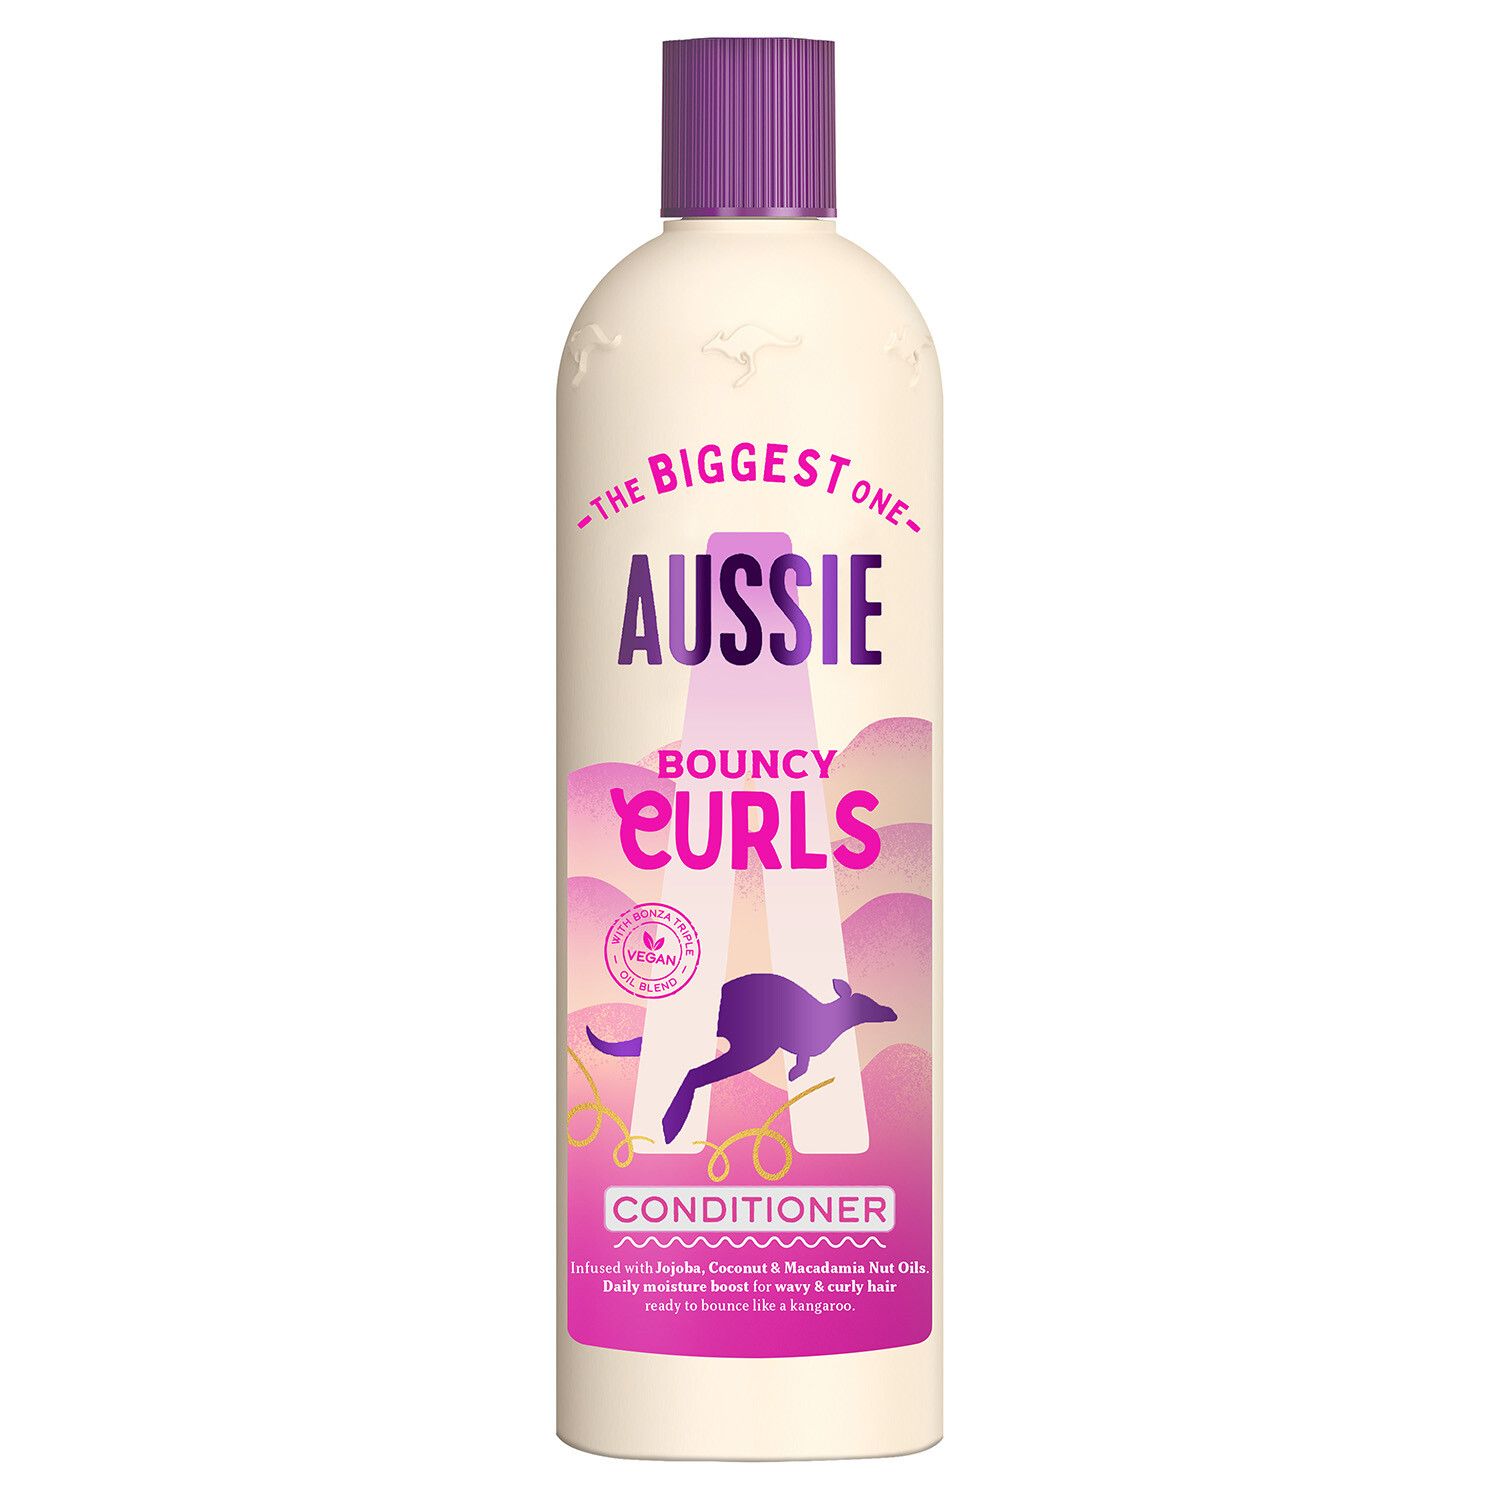 Aussie Bouncy Curls Conditioner 470ml - Natural Image